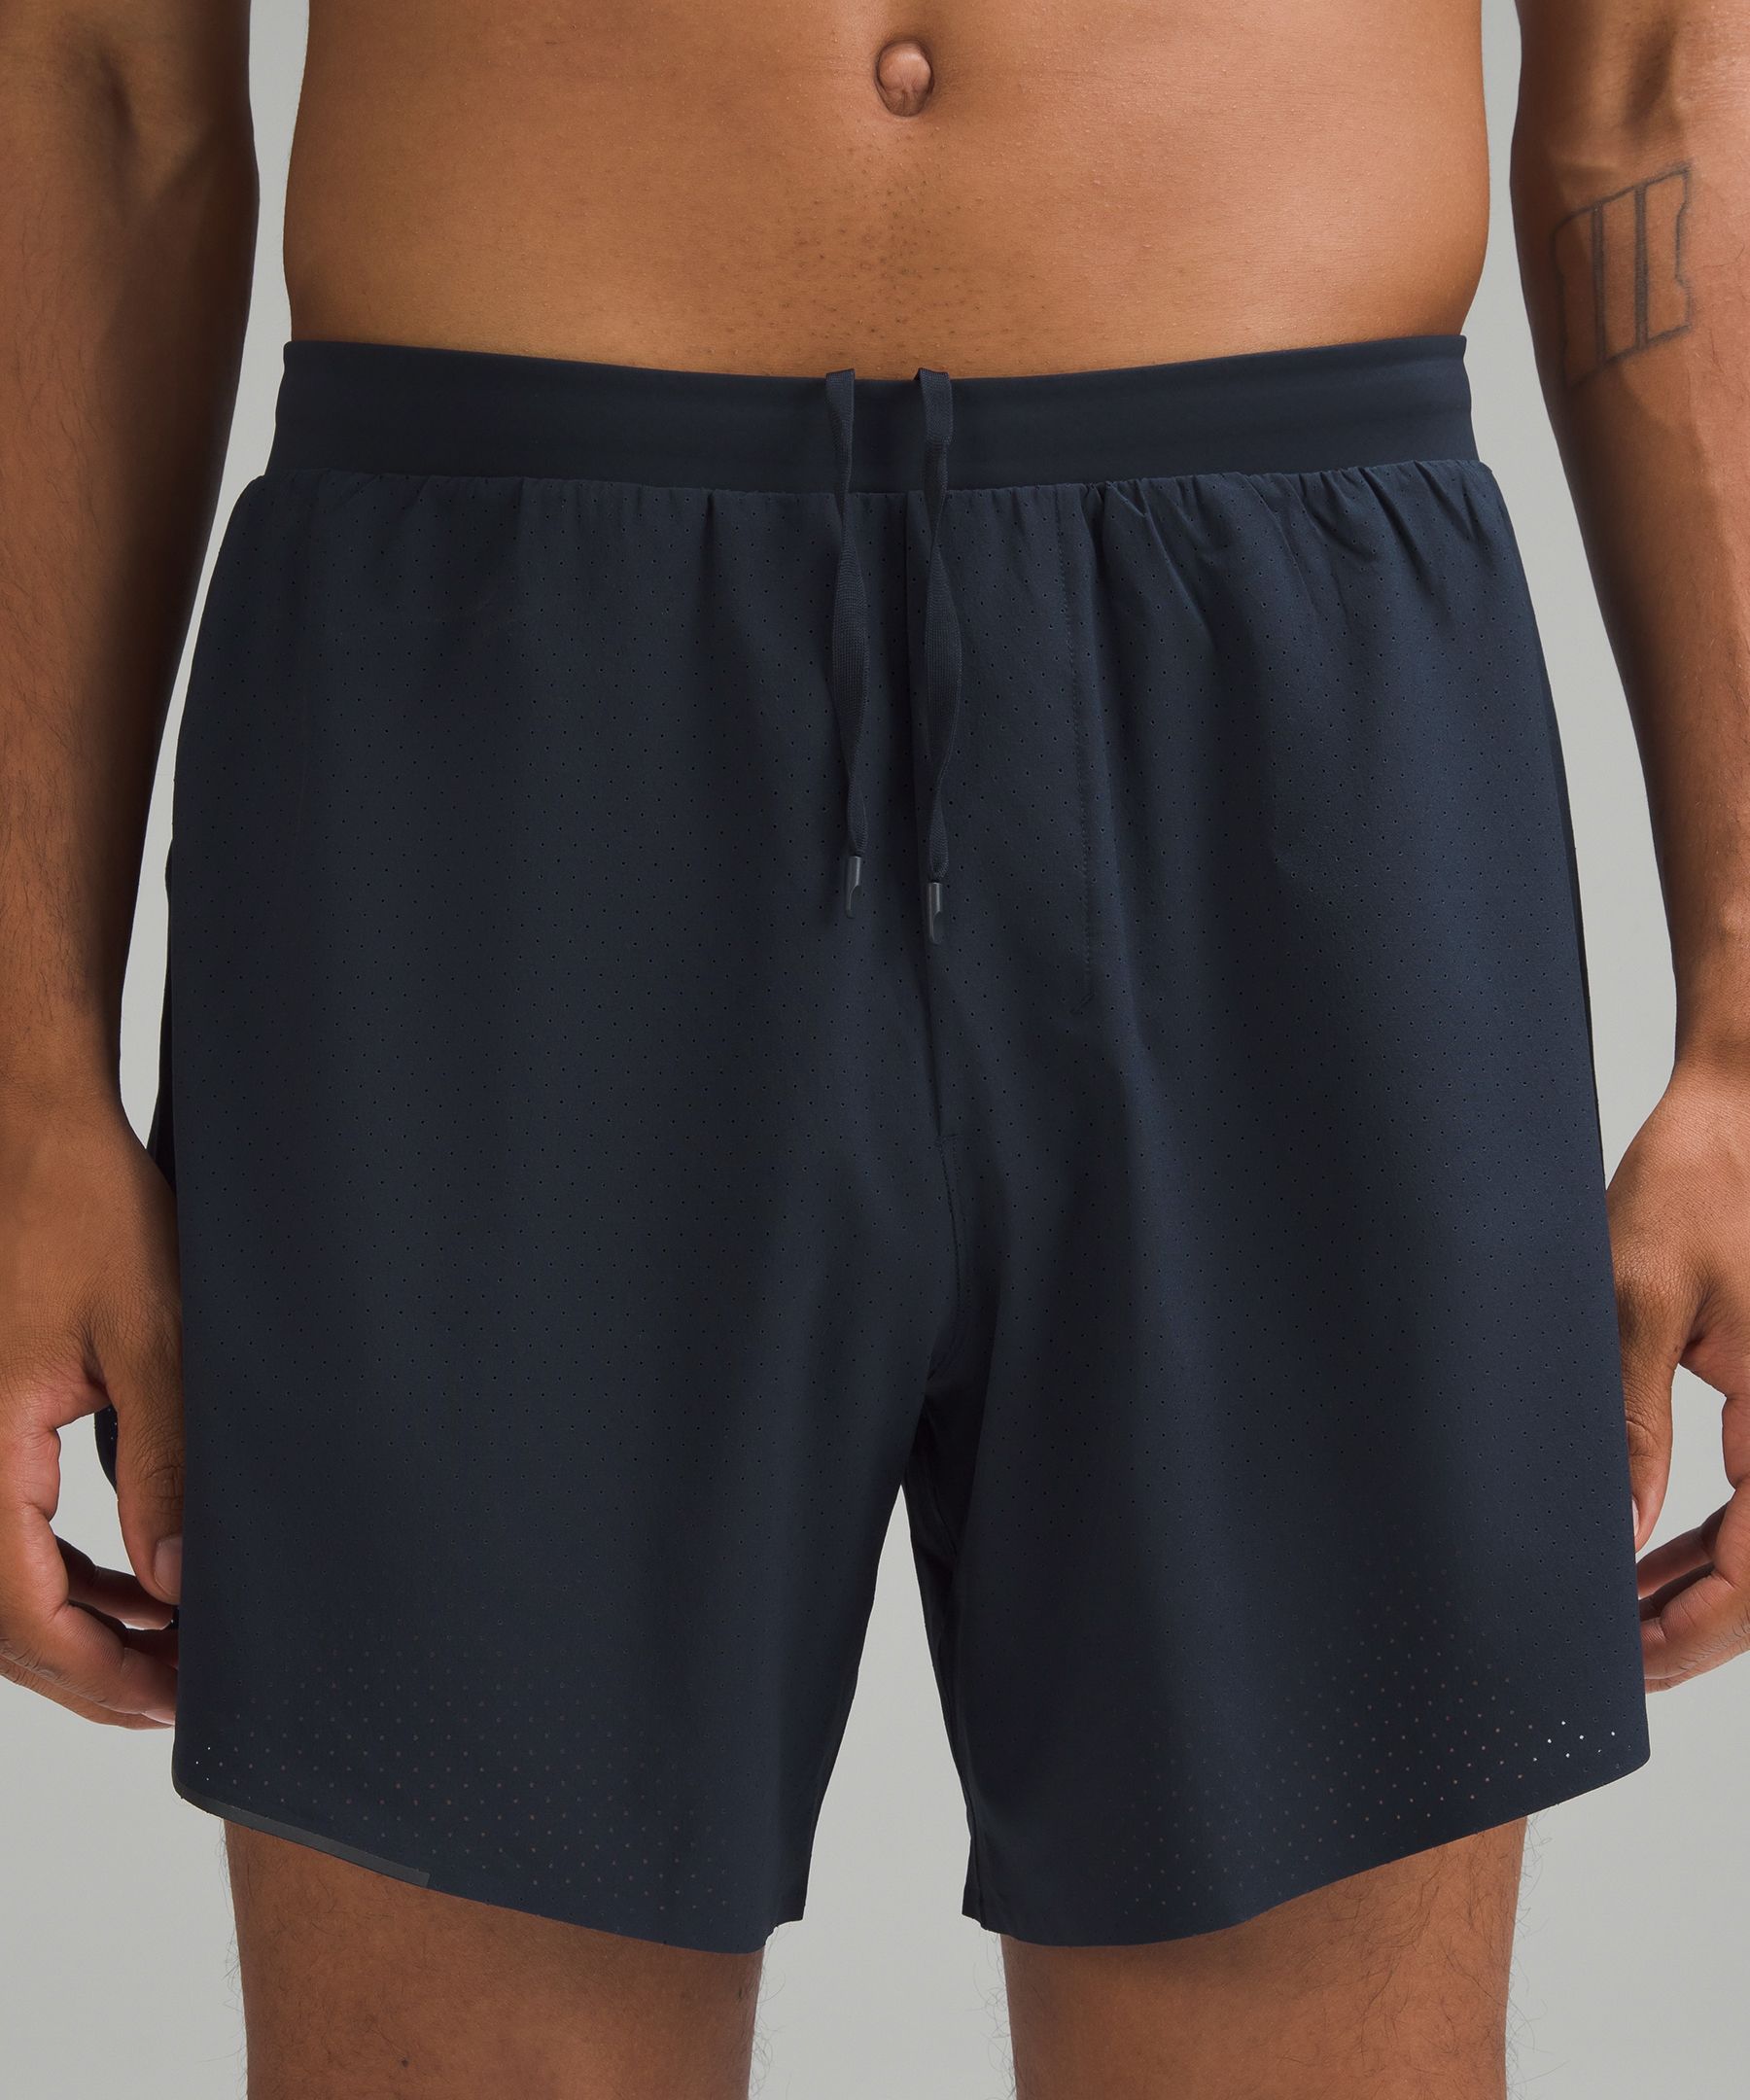 Fast and Free Linerless Short 6, Men's Shorts